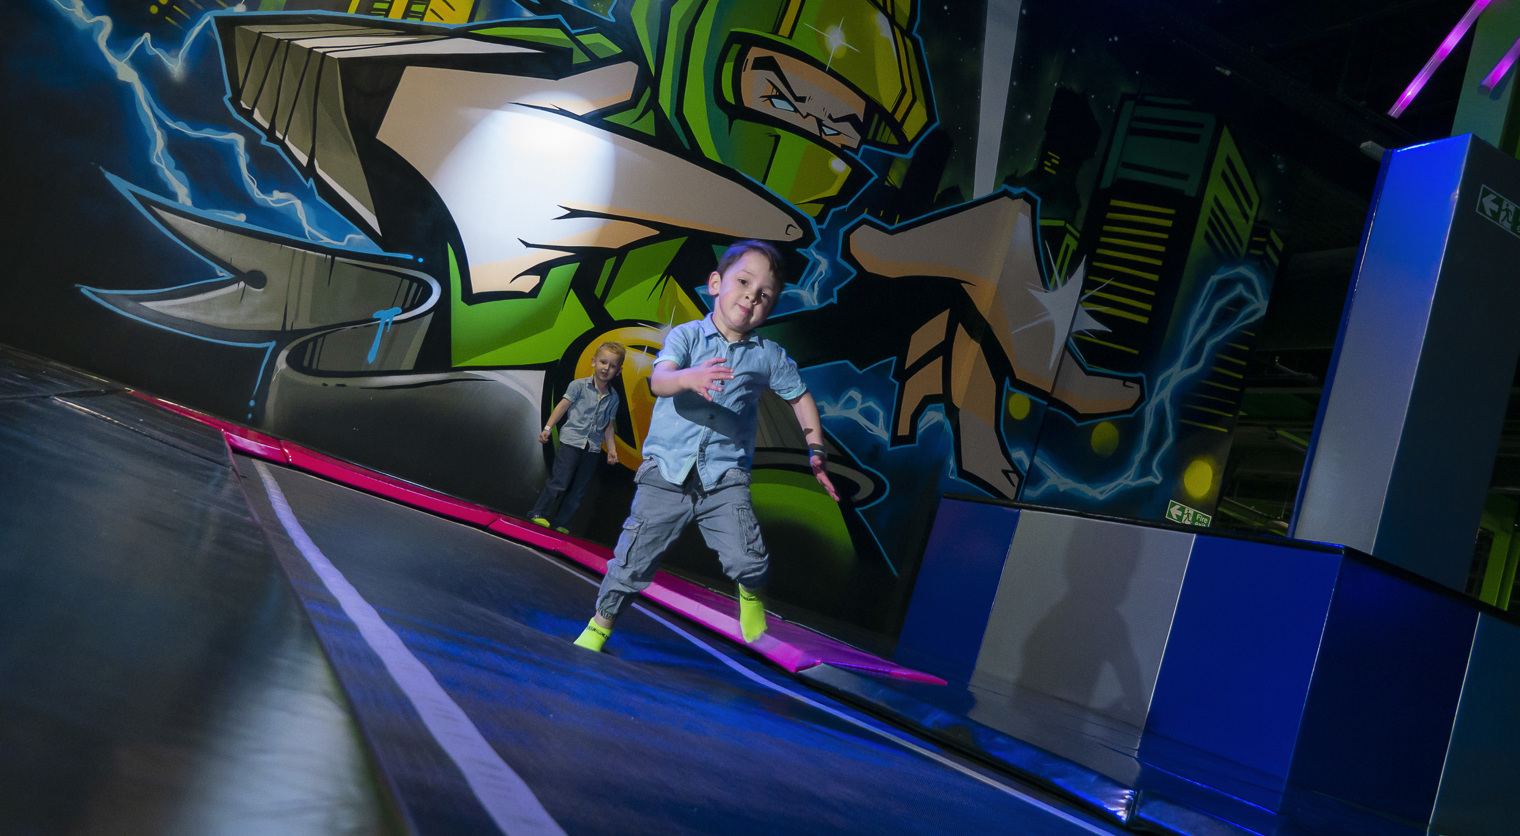 A young child running along the Tumble Tracks at Flip Out UK